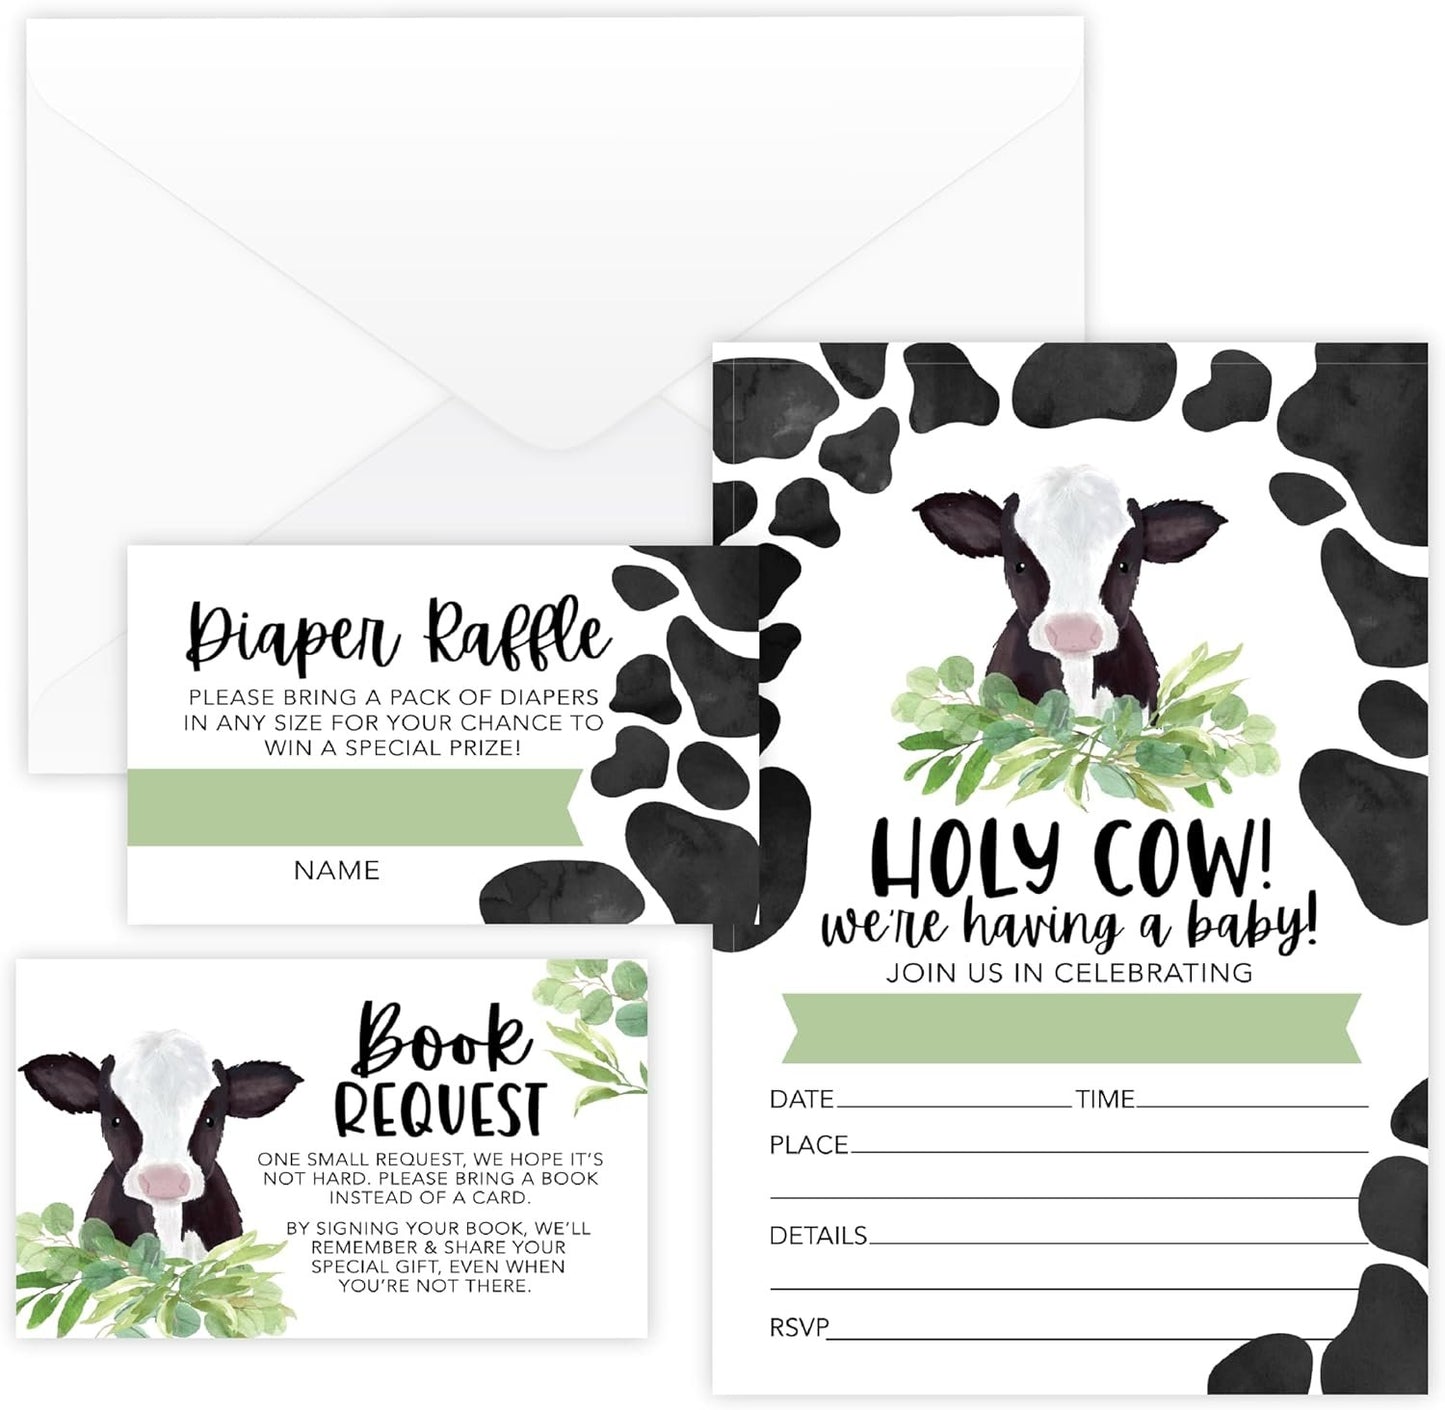 15 Holy Cow Baby Shower Invitations Gender Neutral - Baby Shower Invitations For Girl, Boy Baby Shower Invites For Boy, Baby Boy Shower Invitations, Baby Girl Baby Shower Invitations With Envelopes